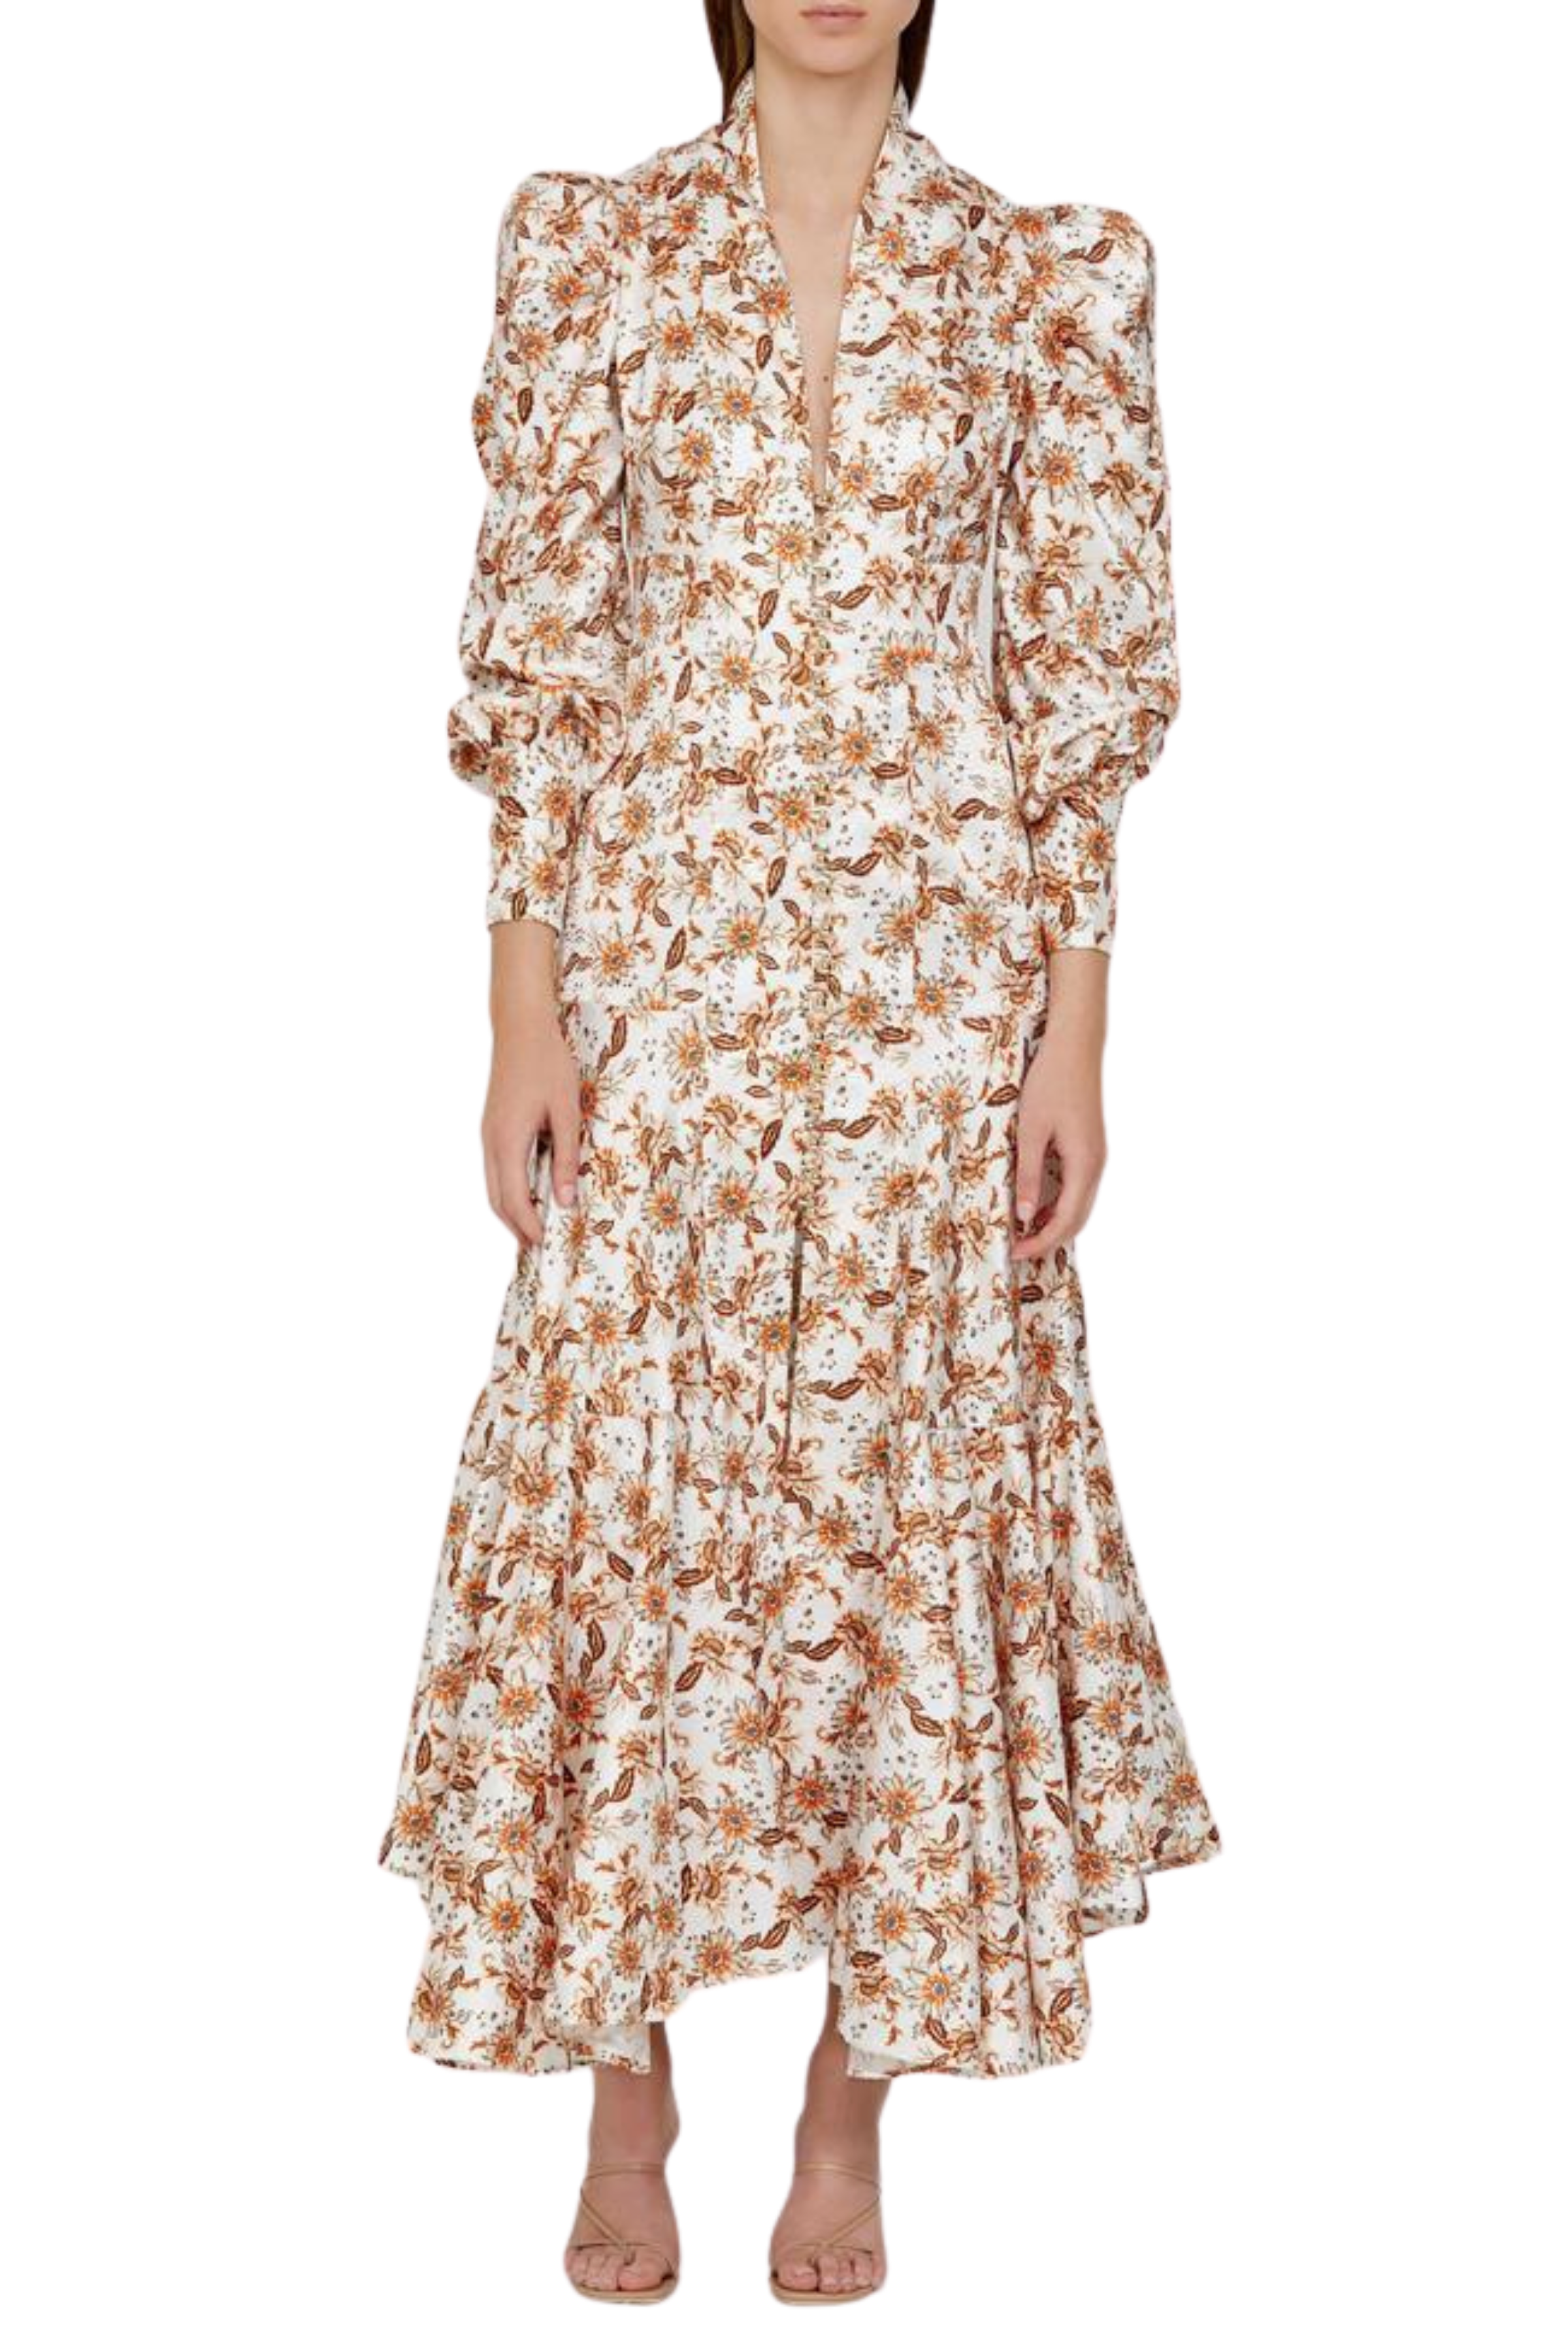 Acler BUY IT ACLER Horrock Dress (Ivory) - acler-horrock-dress-ivory--rrp-5-dress-for-a-night-30753624_1f5344ea-c544-4493-a36b-301f6a0199ba.png